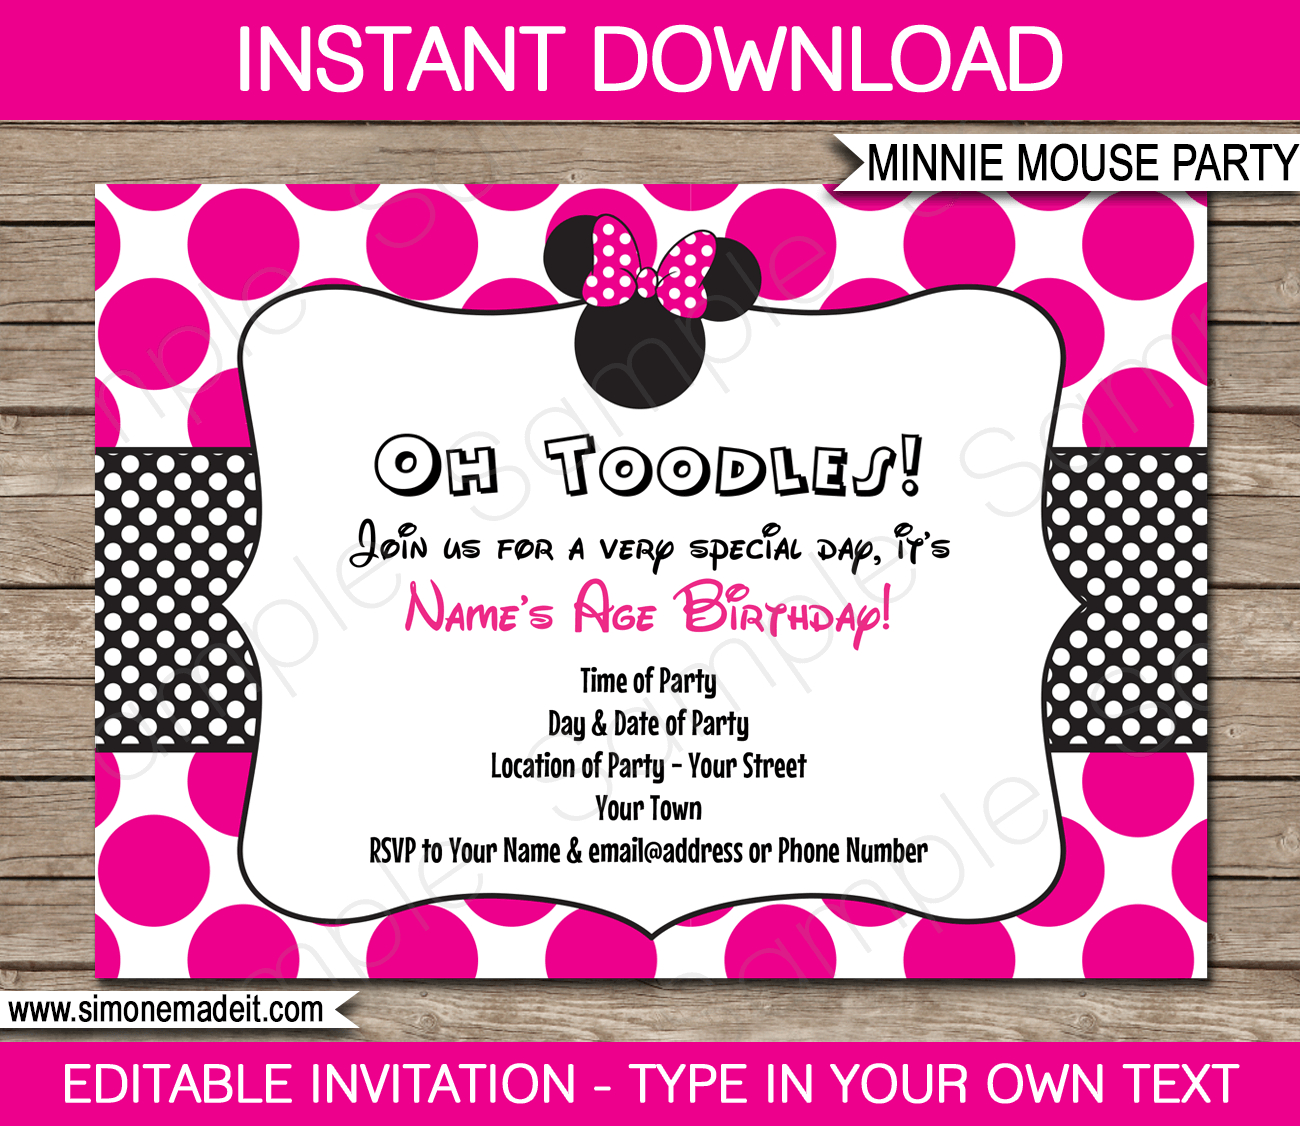 Minnie Mouse Party Invitations Template | Birthday Party - Free Printable Minnie Mouse Party Invitations